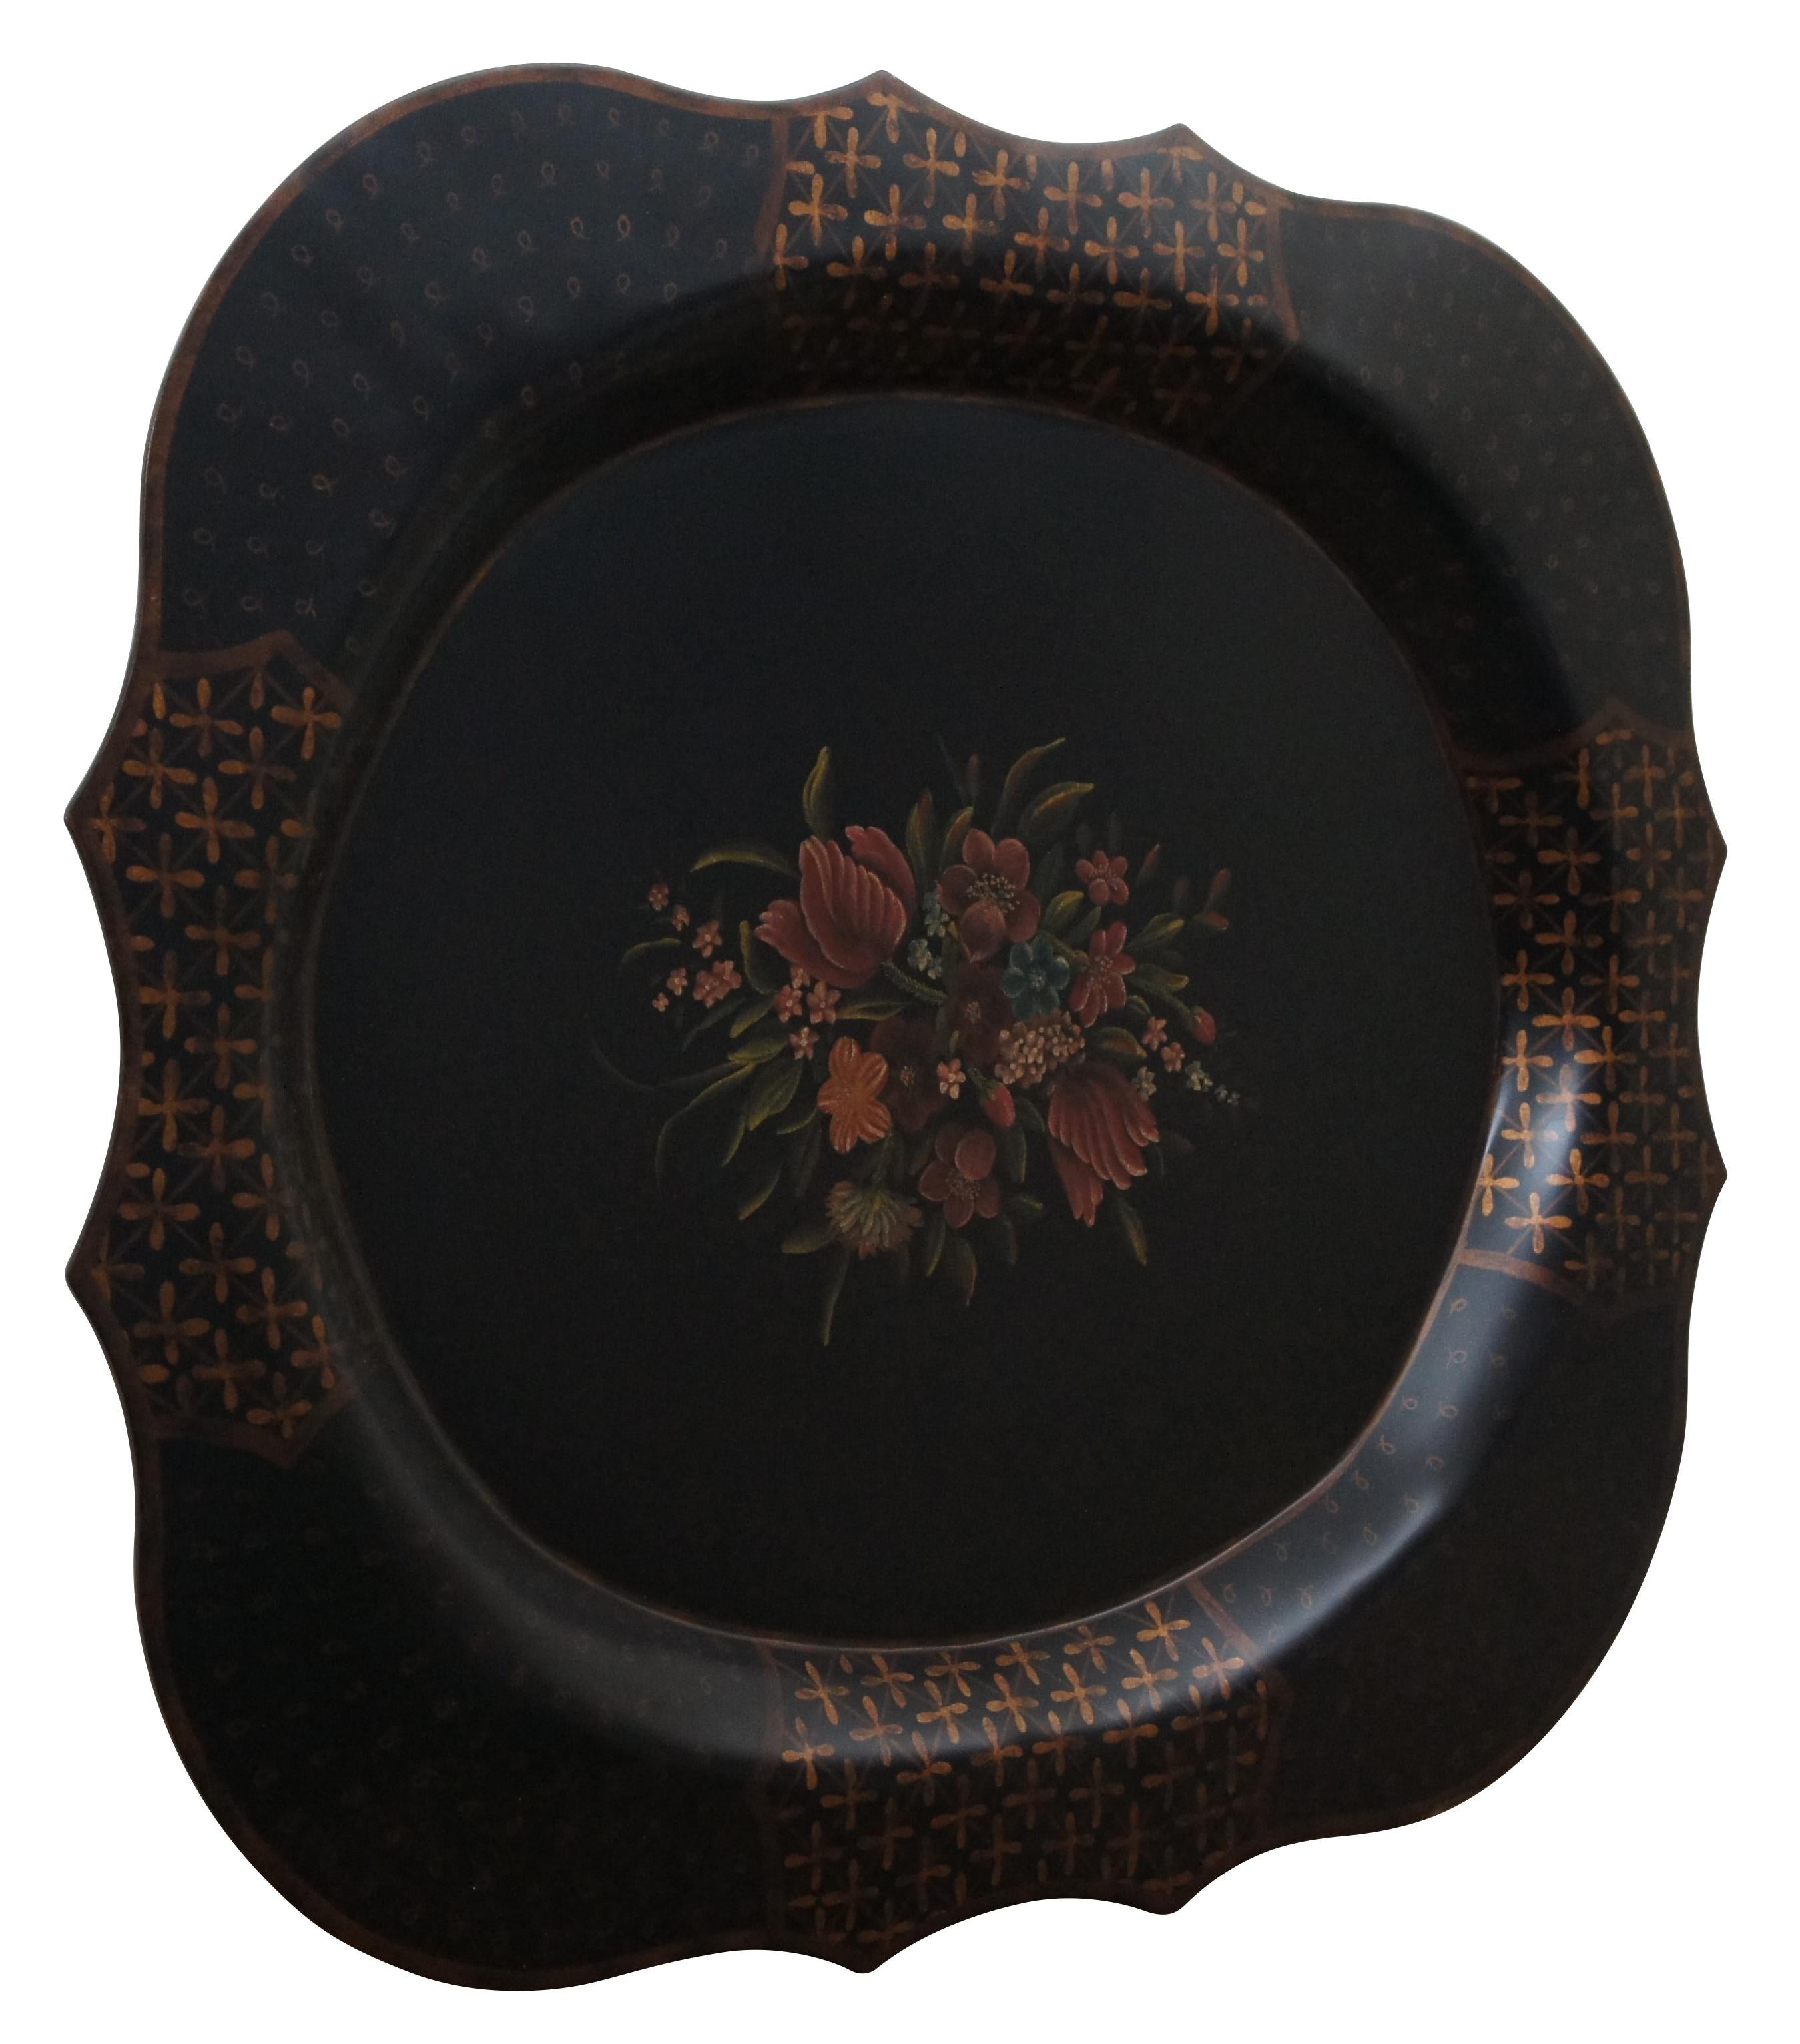 A large and impressive over-sized black scalloped toleware tray with gold accents along the edges and a bouquet of flowers at the center. Wood panel and picture wire added to back for hanging on the wall.